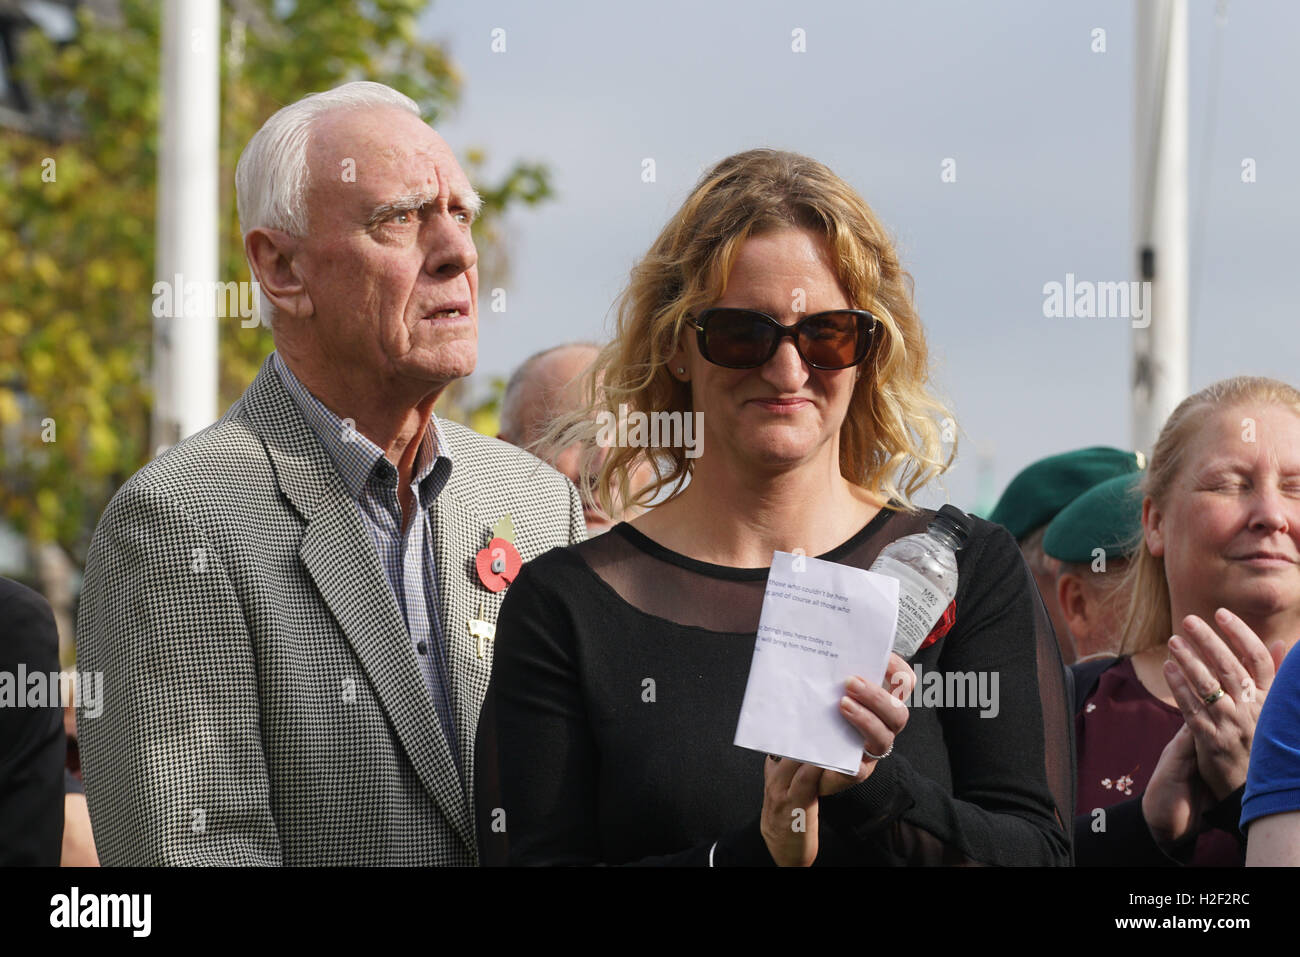 London, England,UK. 28th Oct 2016: Claire Blackman WIFE OF MARINE ‘A’ attends Parliament Square in support of jailed Sgt Alexander Blackman who was convicted of murdering a Taliban fighter in 2013, London ,UK. Credit:  See Li/Alamy Live News Stock Photo